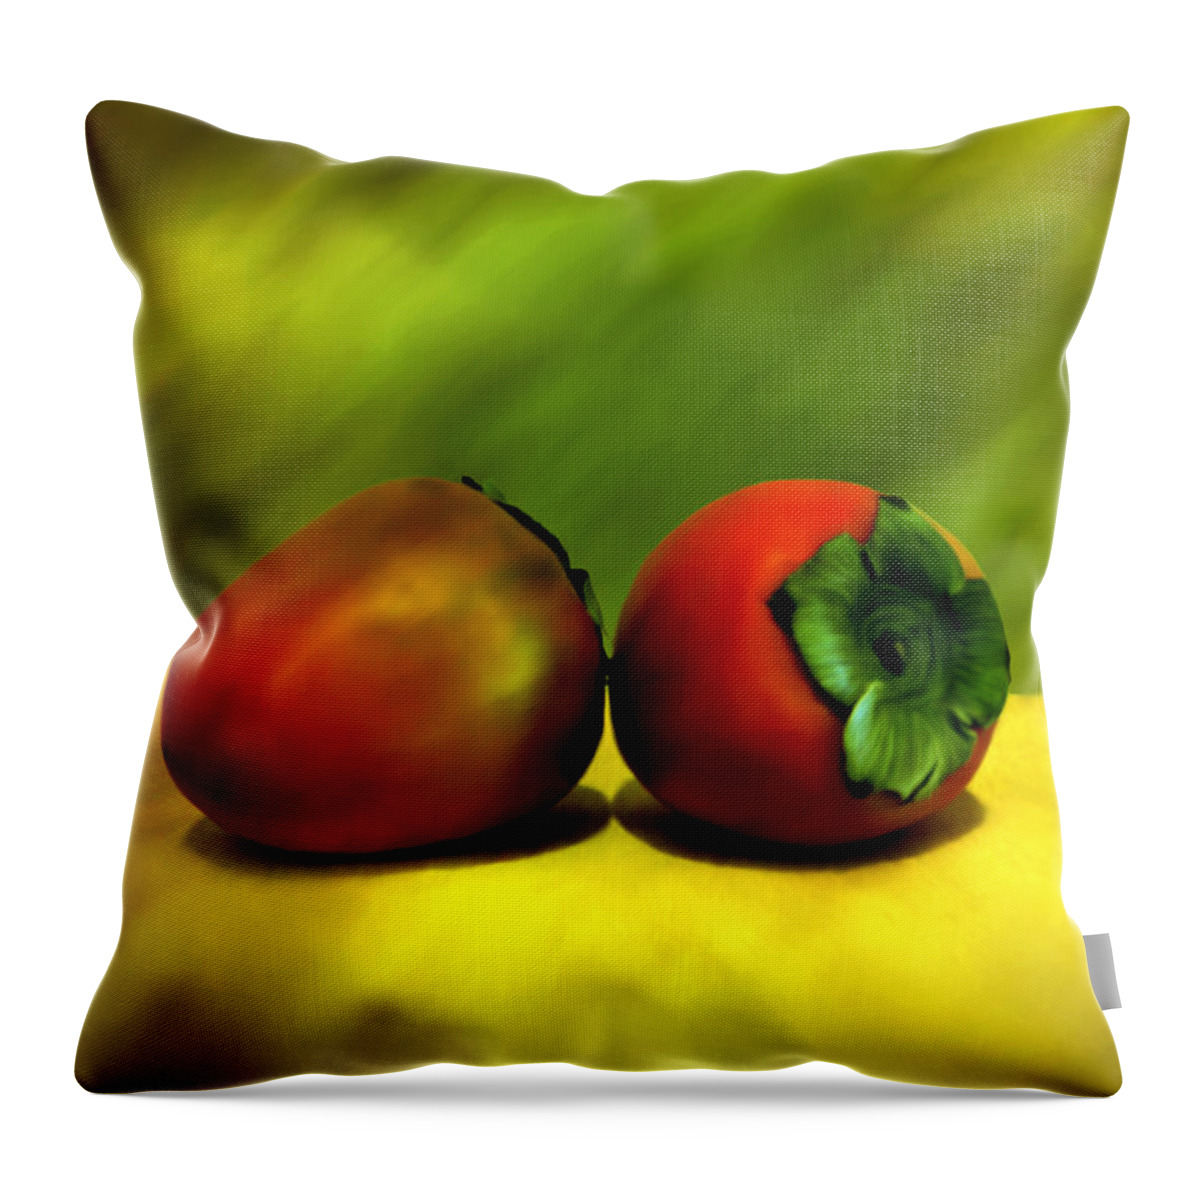 Still Life Throw Pillow featuring the photograph Food for the Gods by Kurt Van Wagner